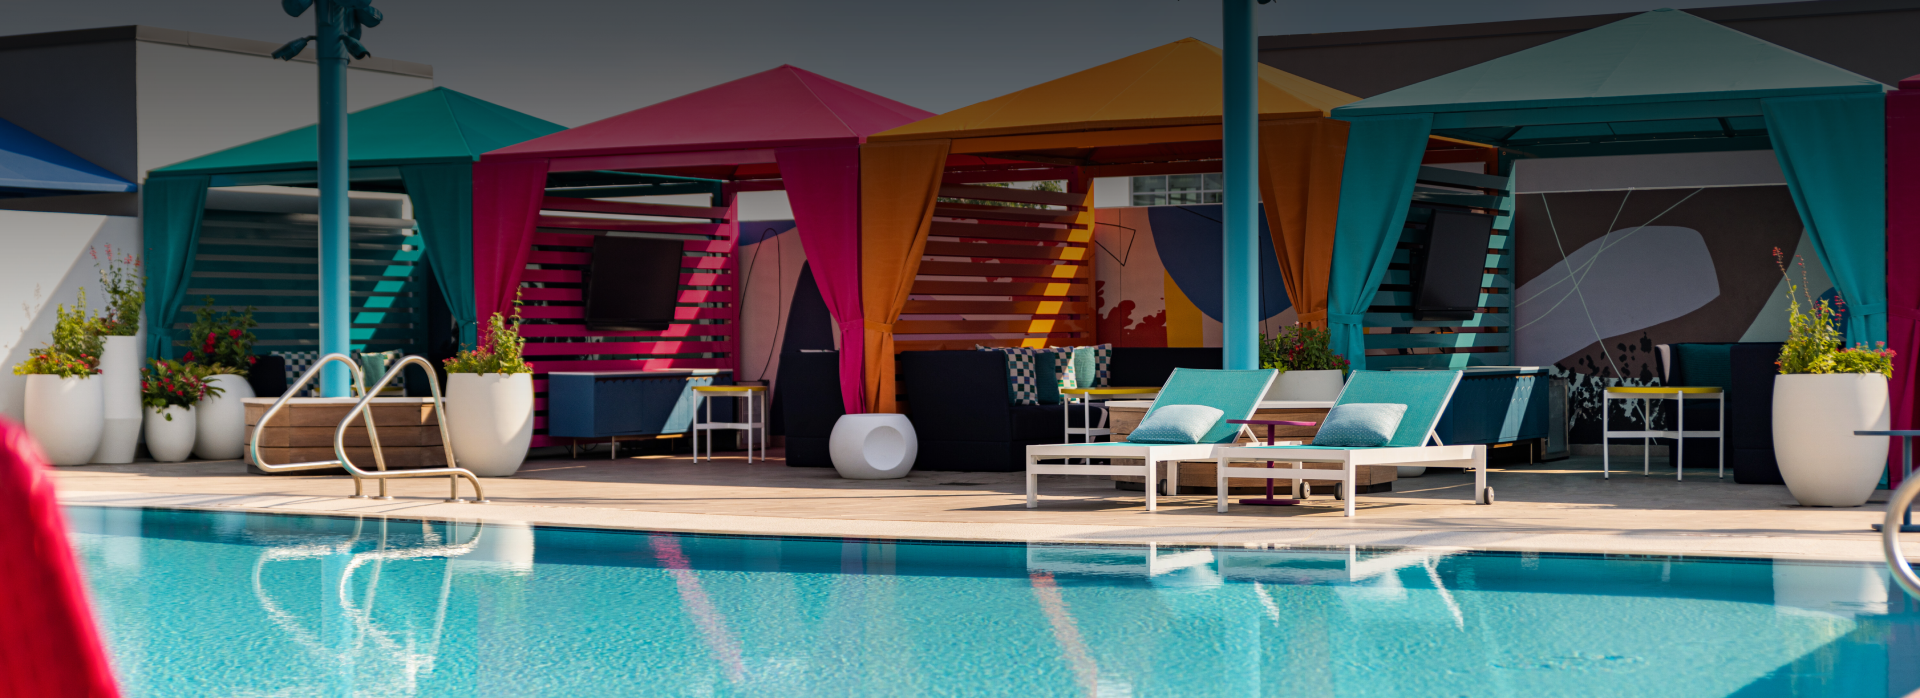 Wave Hotel's Haven Pool and Cabanas